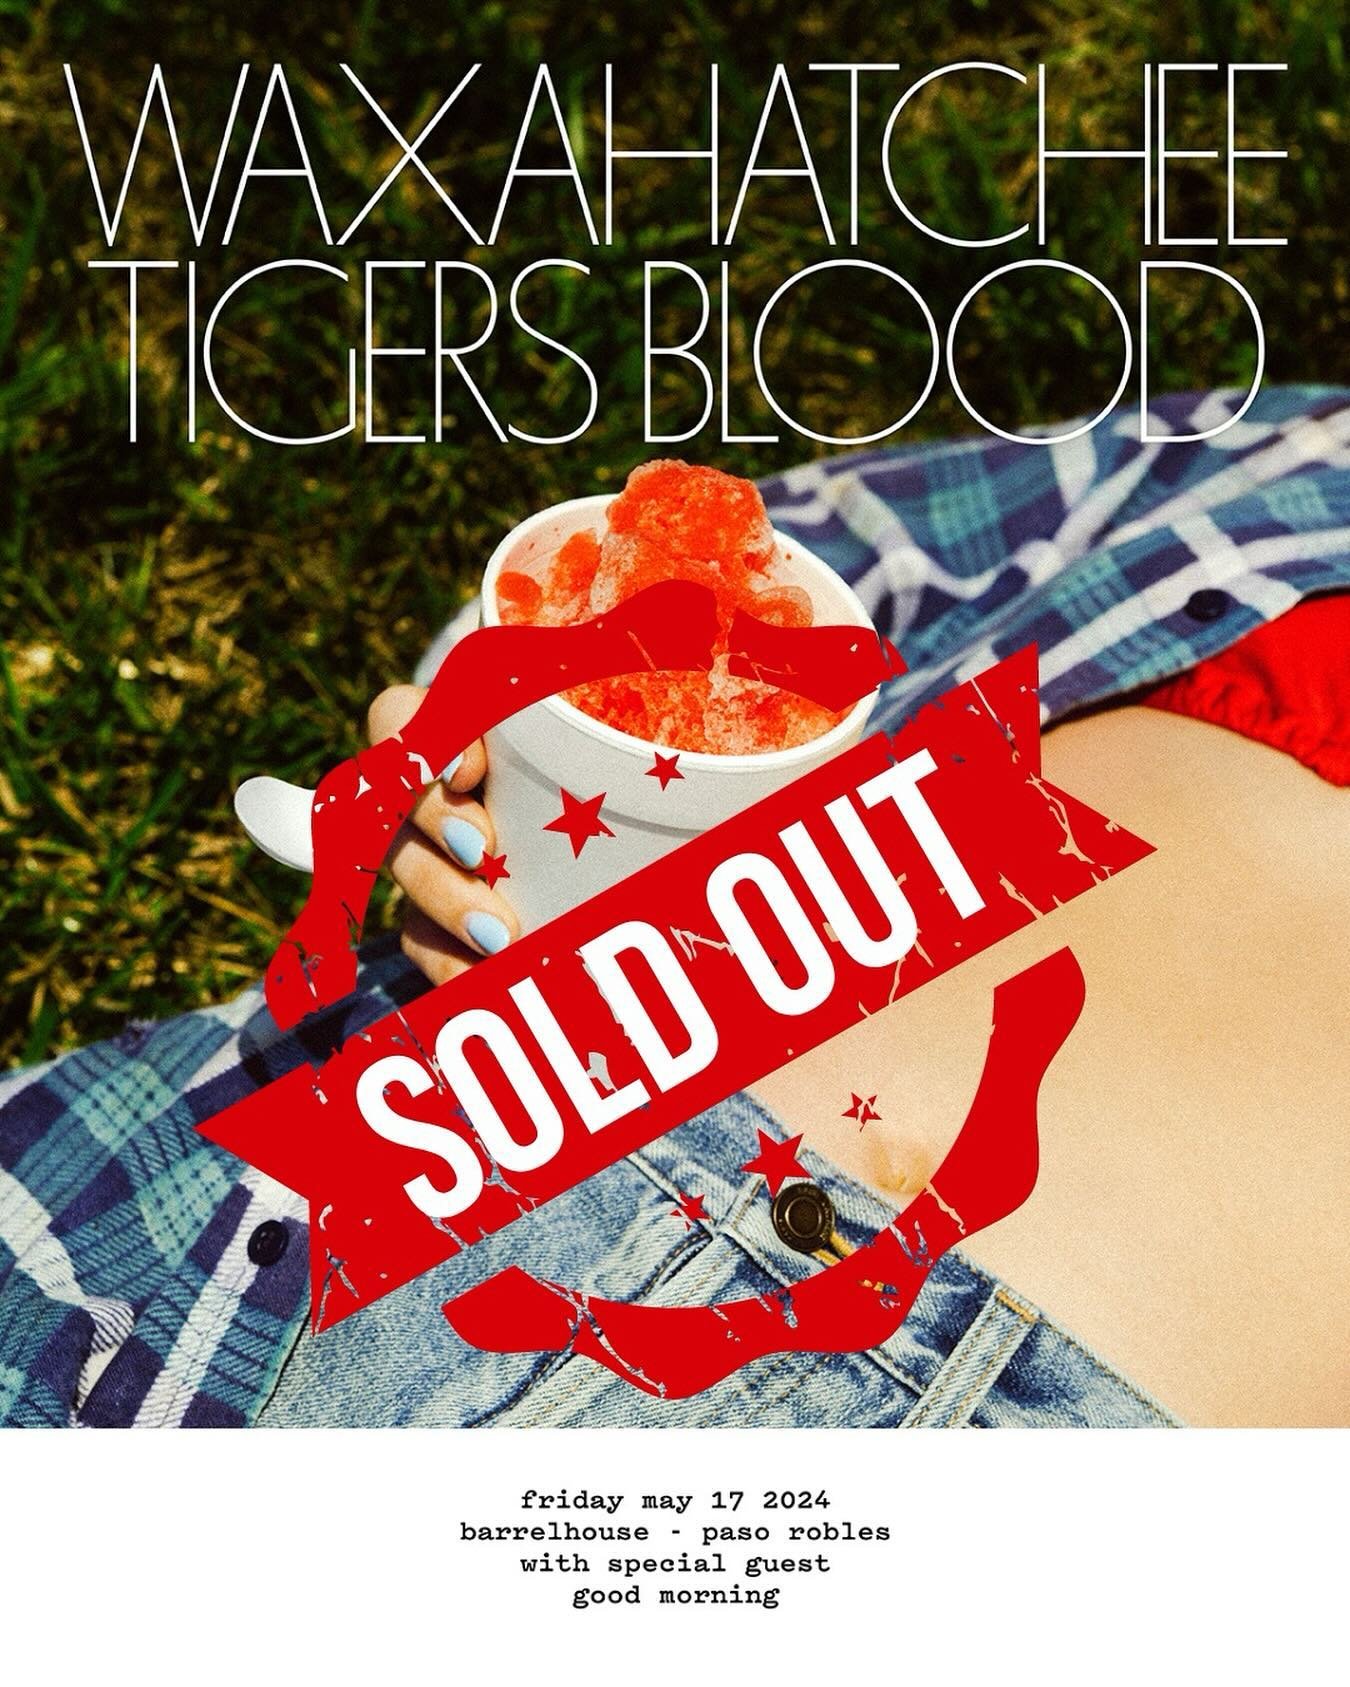 SOLD OUT! 

Waxahatchee&rsquo;s show at BarrelHouse Brewing Co. is SOLD OUT on May 17th! 

Big thanks to everyone who snagged tickets. Get ready for an epic night of tunes! 

Stay tuned for more awesome events at BarrelHouse Brewing Co.! 🍻

 #SoldOu